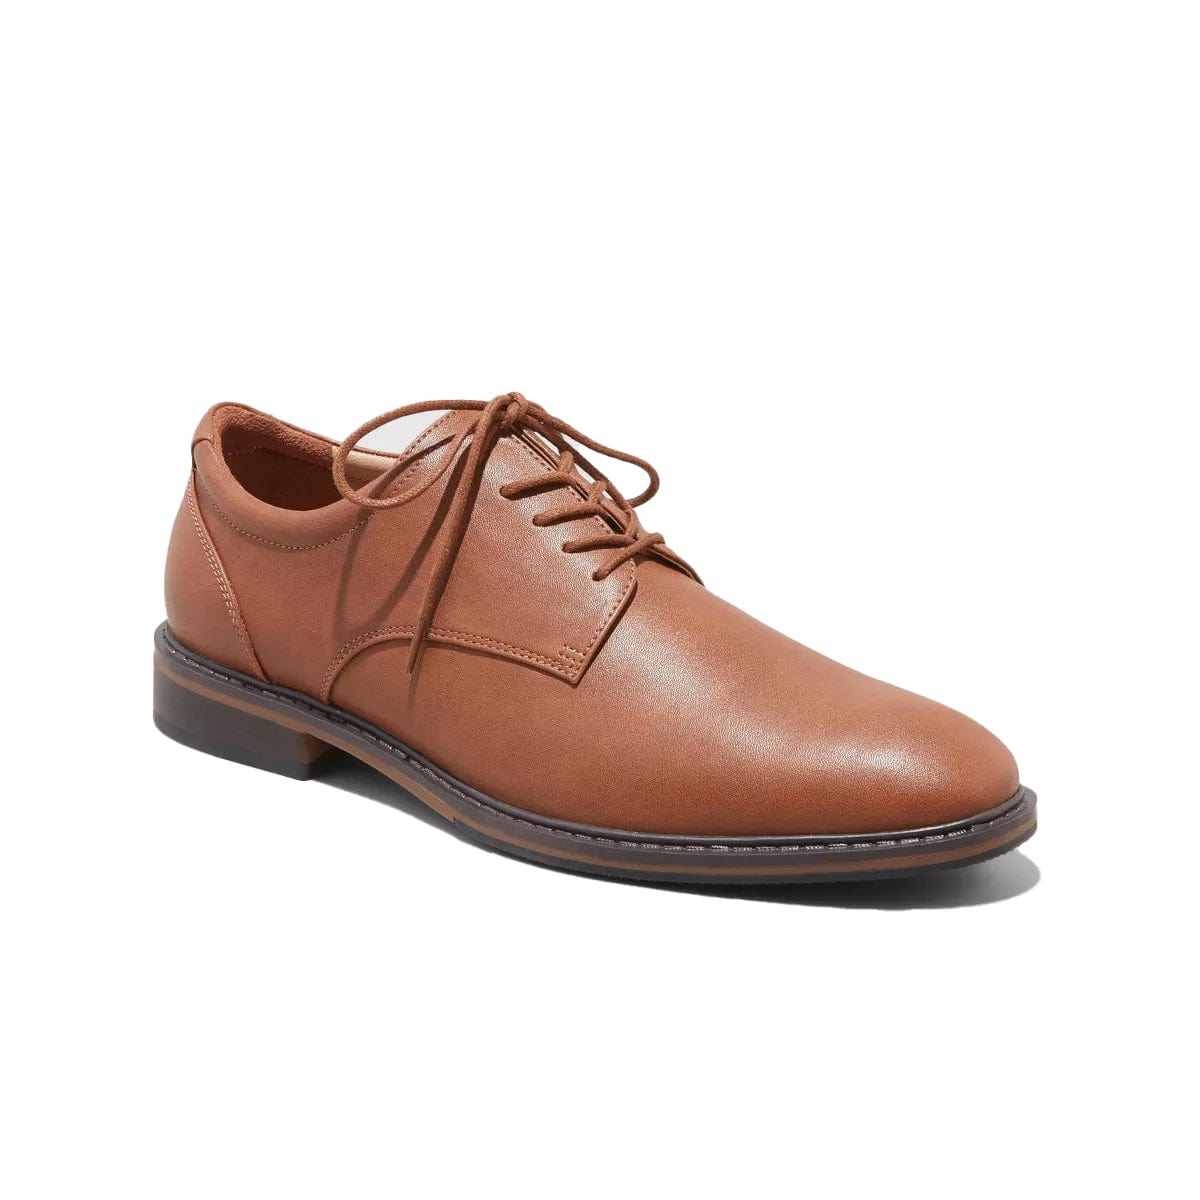 ceehuteey Men's casual leather shoes